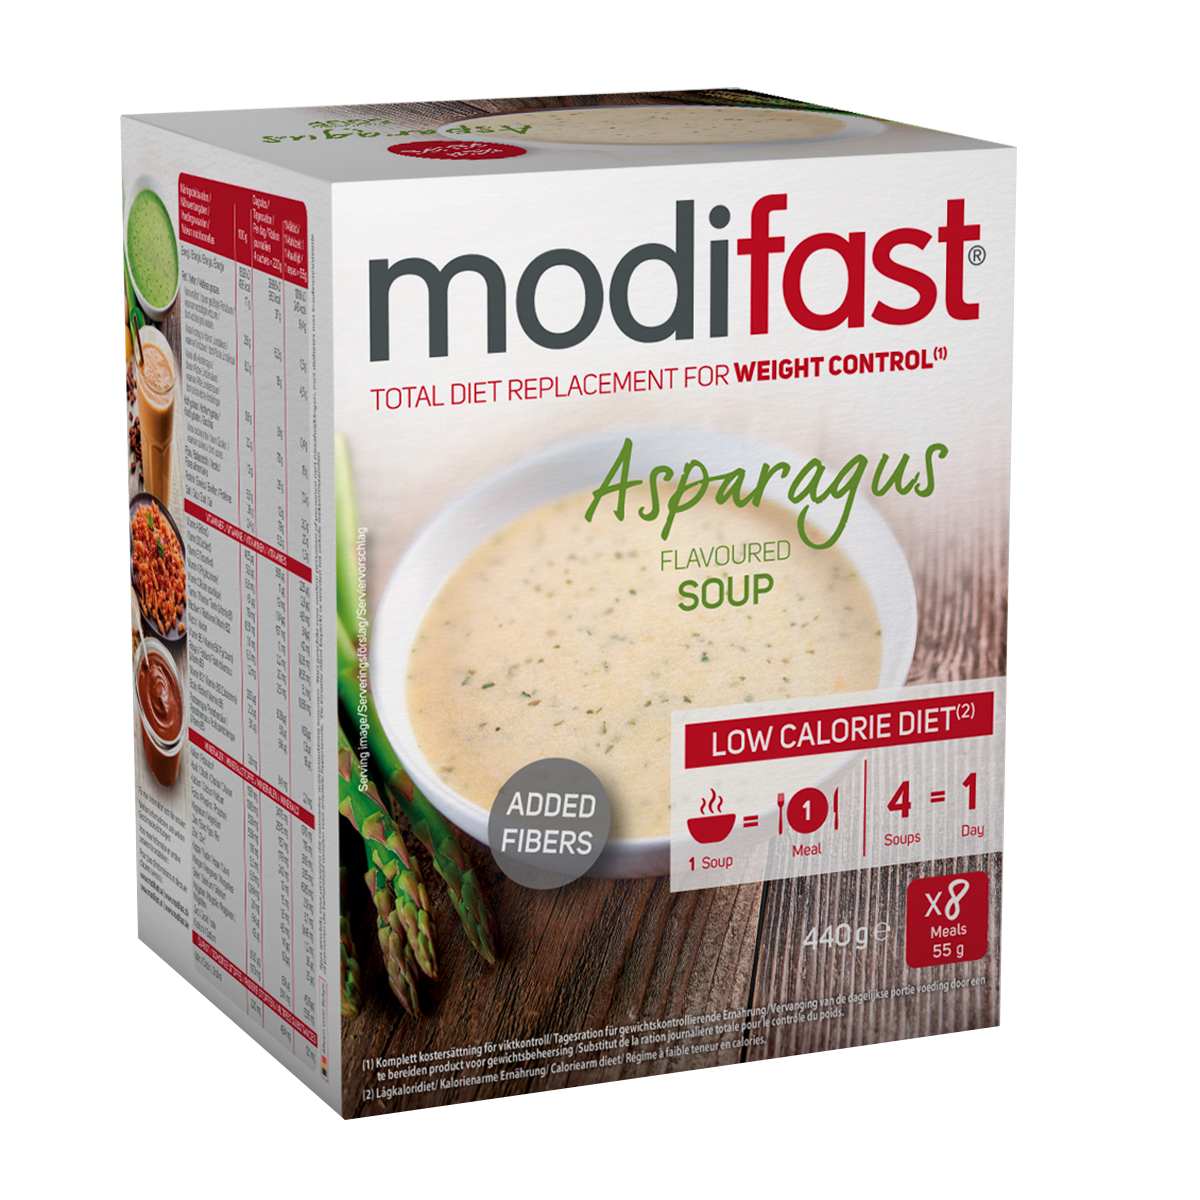  Modifast Spargel Suppe